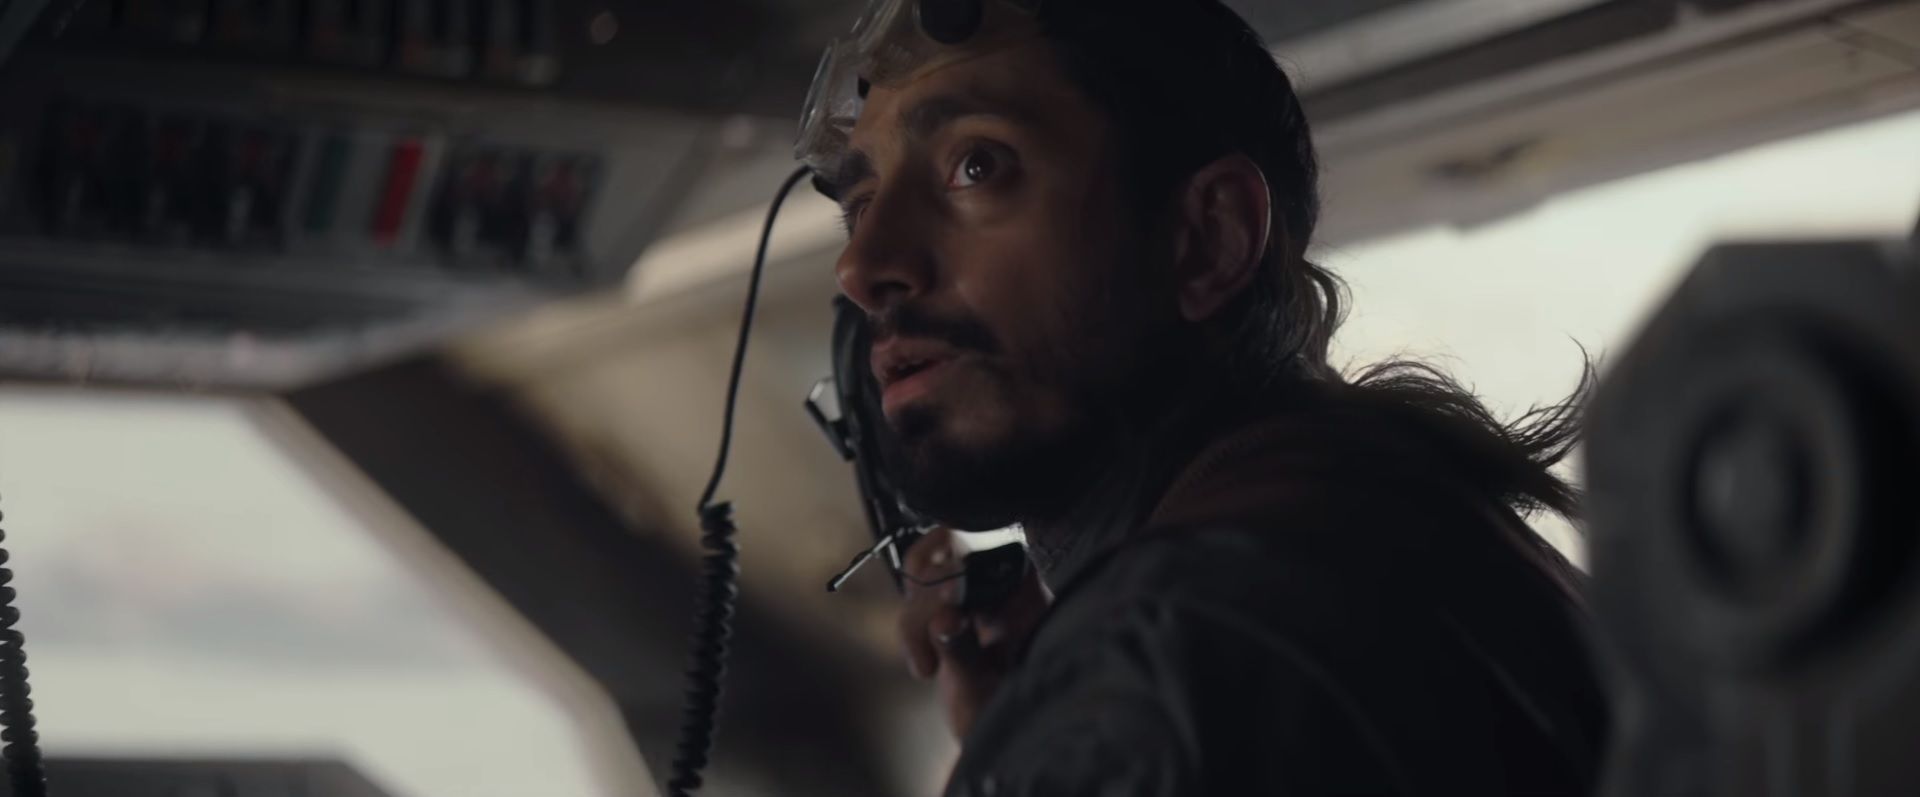 Rogue One A Star Wars Story Trailer 3 - Bodhi Rook